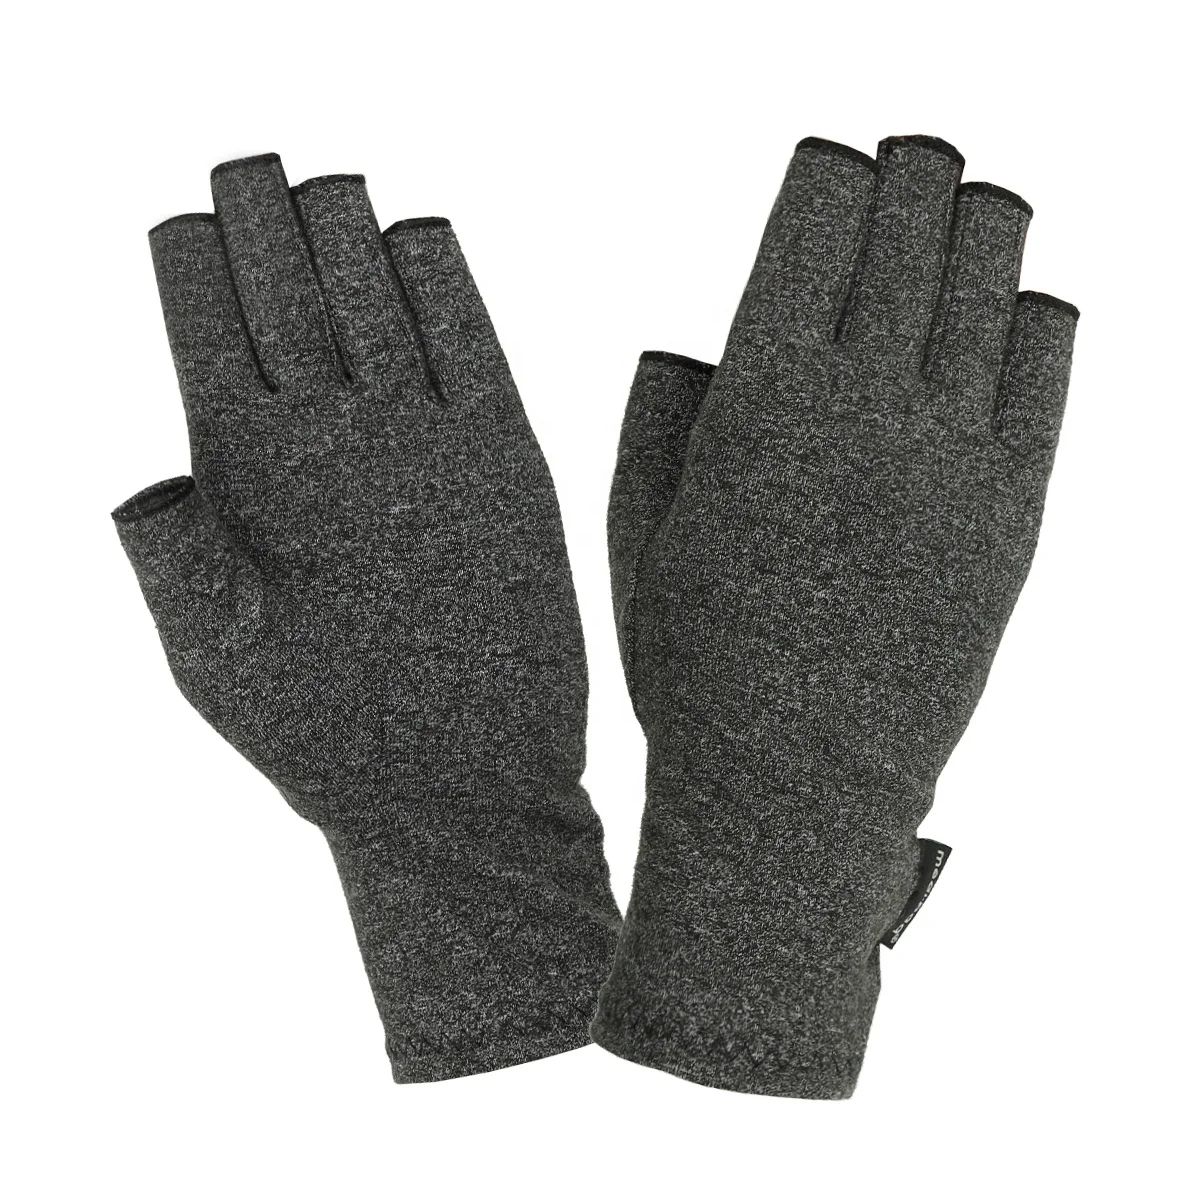 Anti-Arthritis Gloves (Paar) - Providing Warmth and Compression to Help Increase Circulation Reducing Pain and Promoting Healing